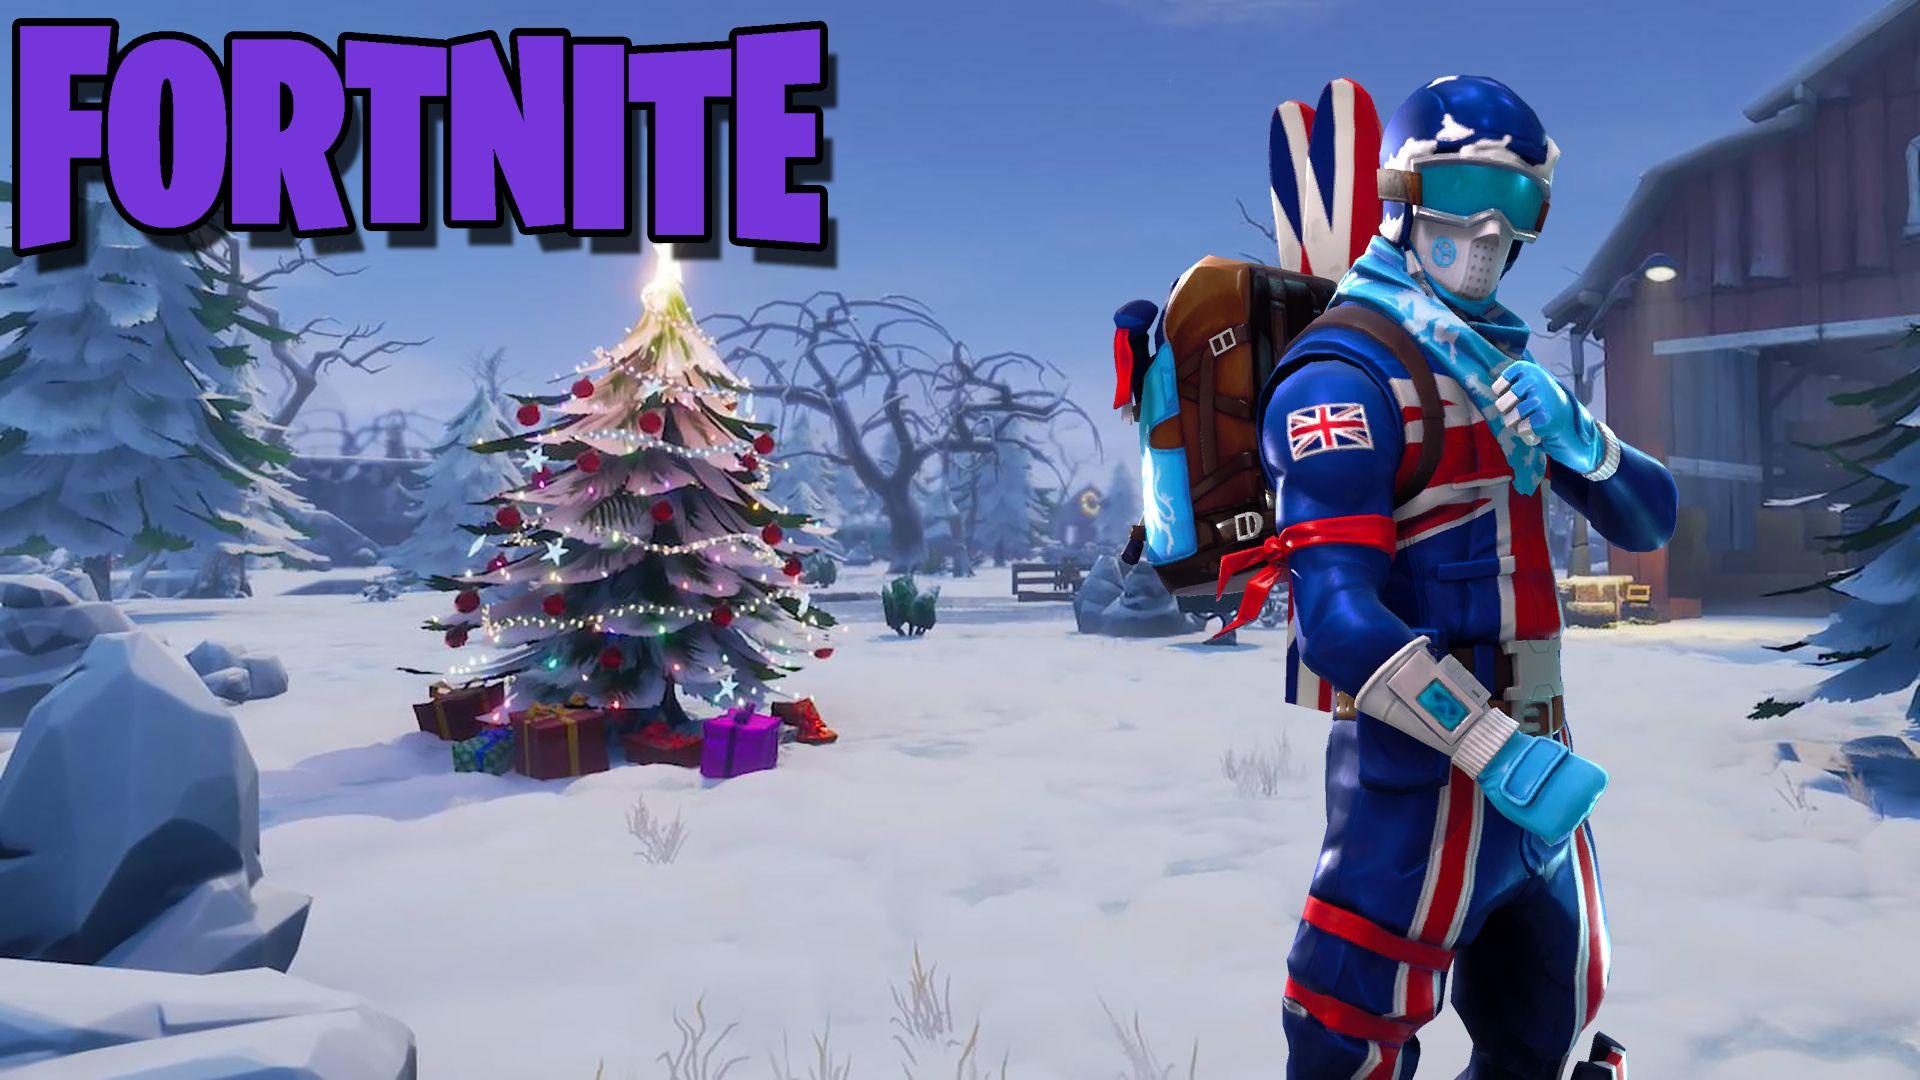 Alpine Ace (GBR) Great Britain Fortnite Outfit Skin